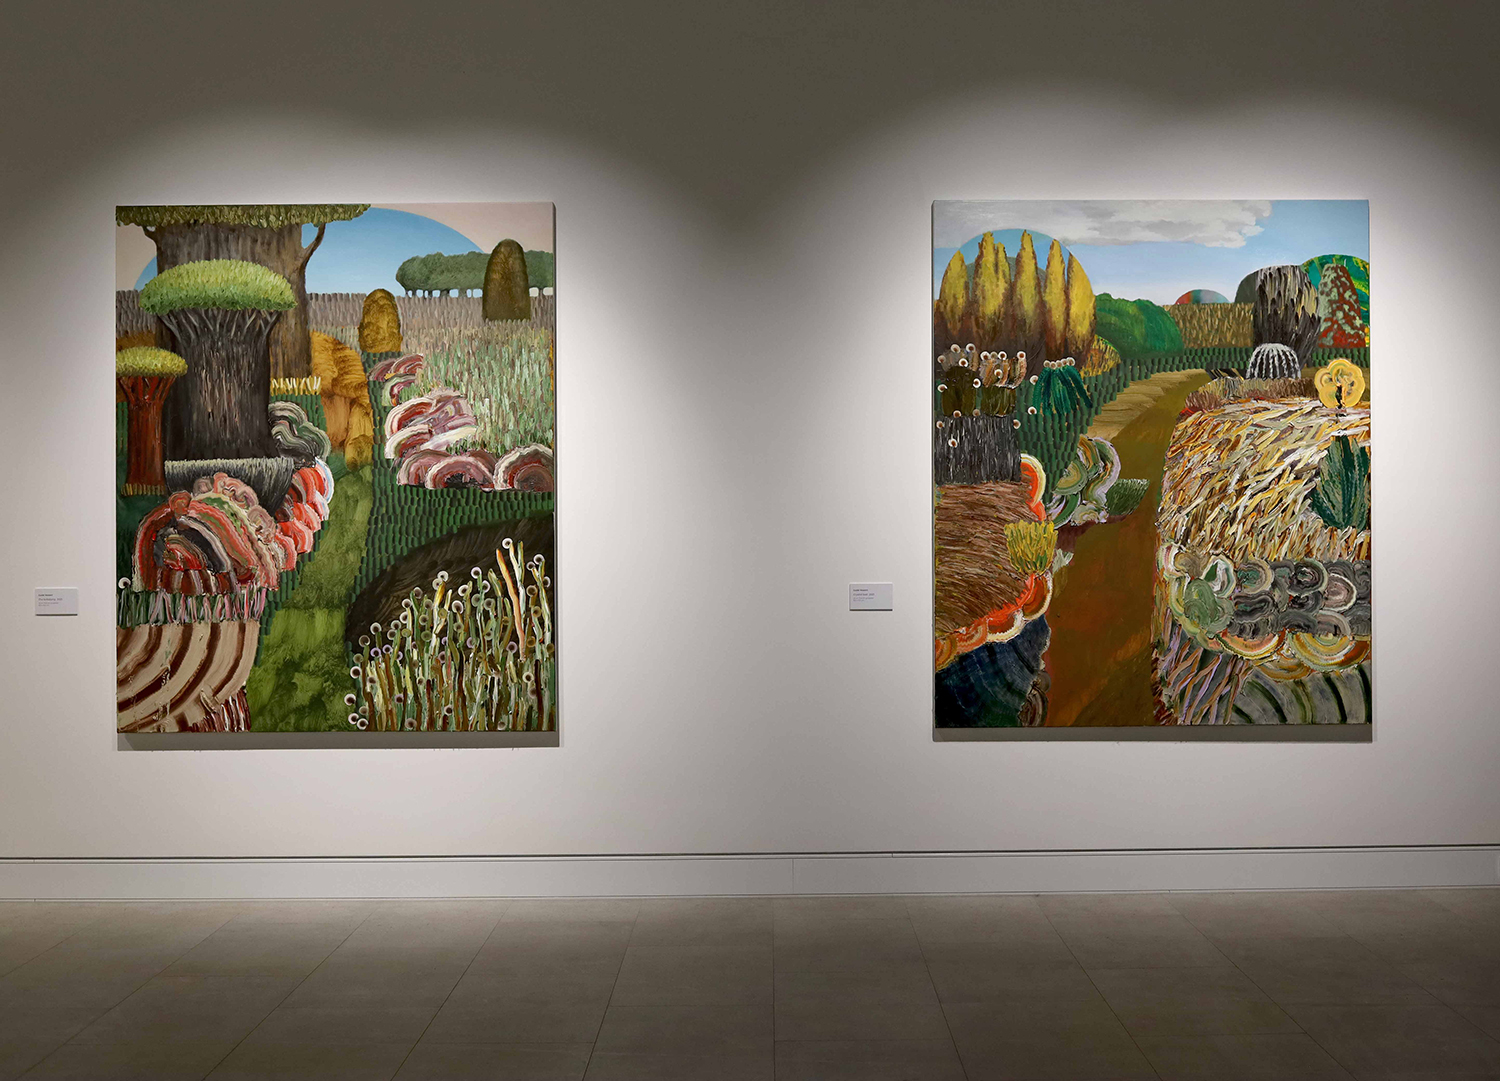 Install view of 'Stories from Homedale'. Image courtesy of Mudgee Arts Precinct.